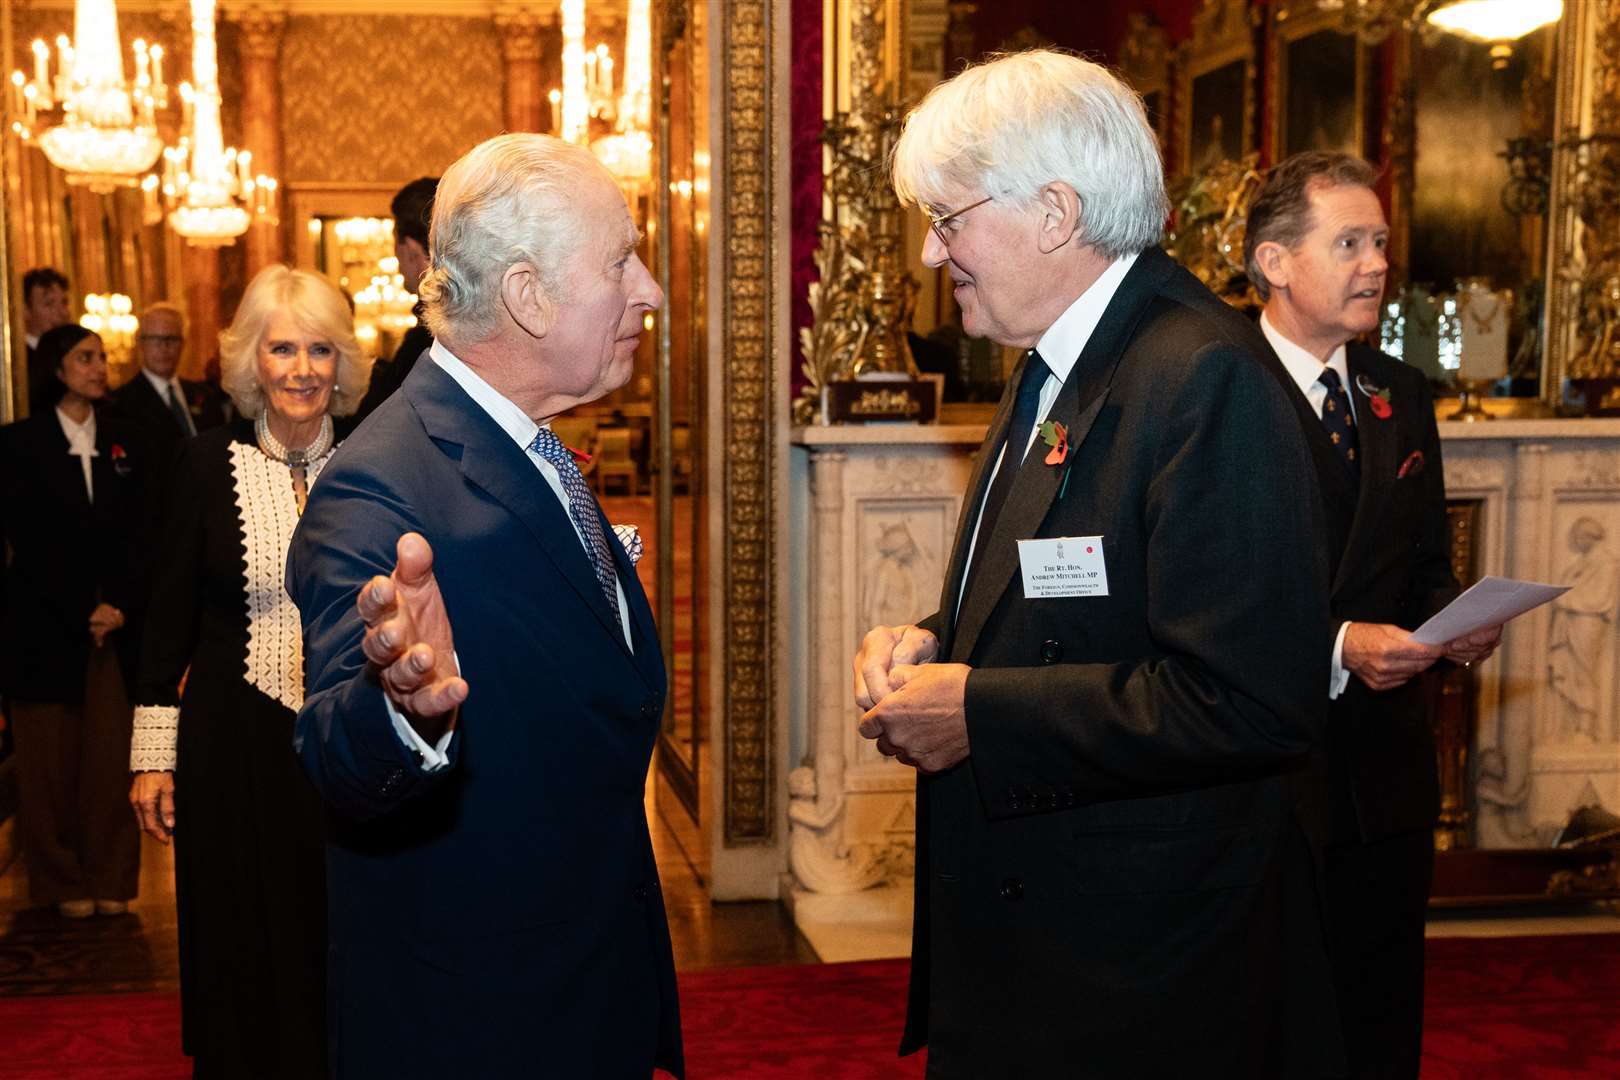 The King with MP Andrew Mitchell during a reception at Buckingham Palace (Aaron Chown/PA)